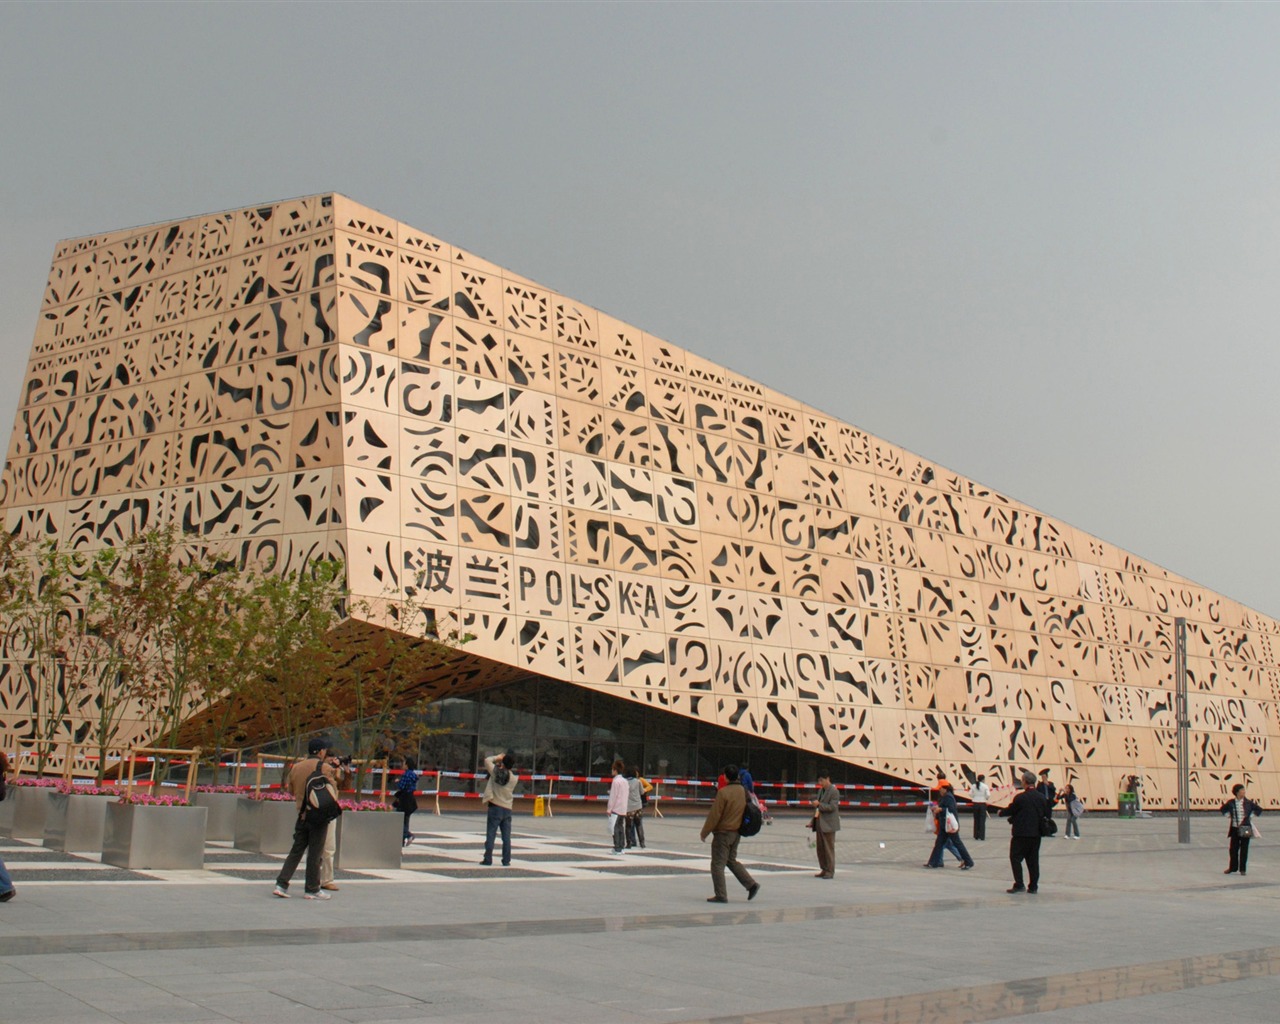 Commissioning of the 2010 Shanghai World Expo (studious works) #25 - 1280x1024